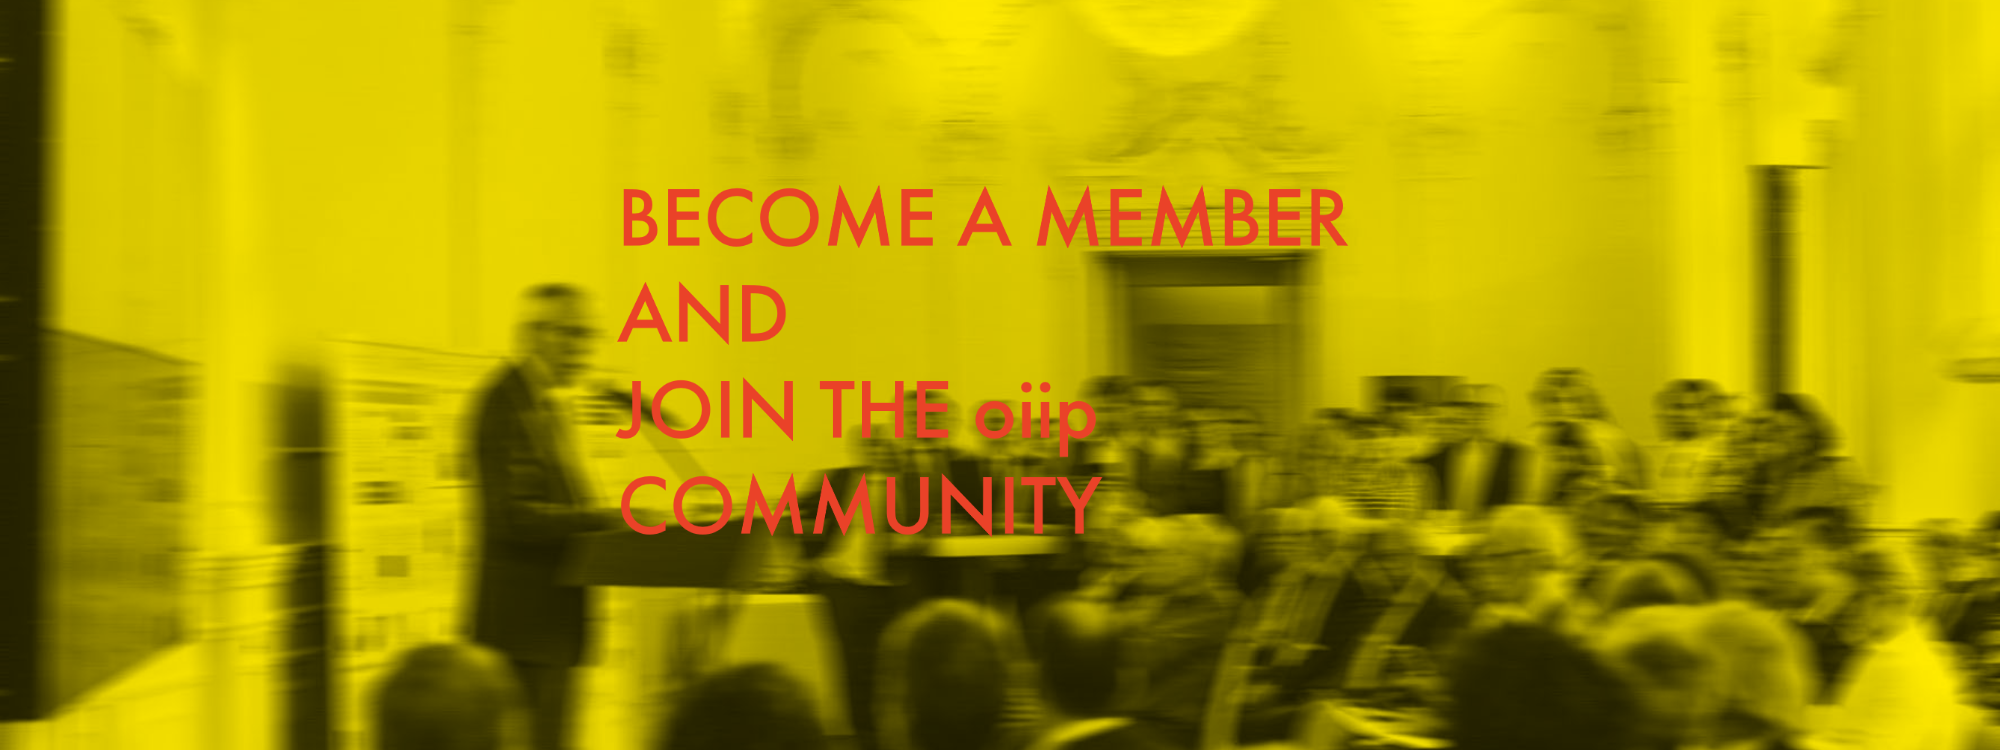 We are expanding our membership network